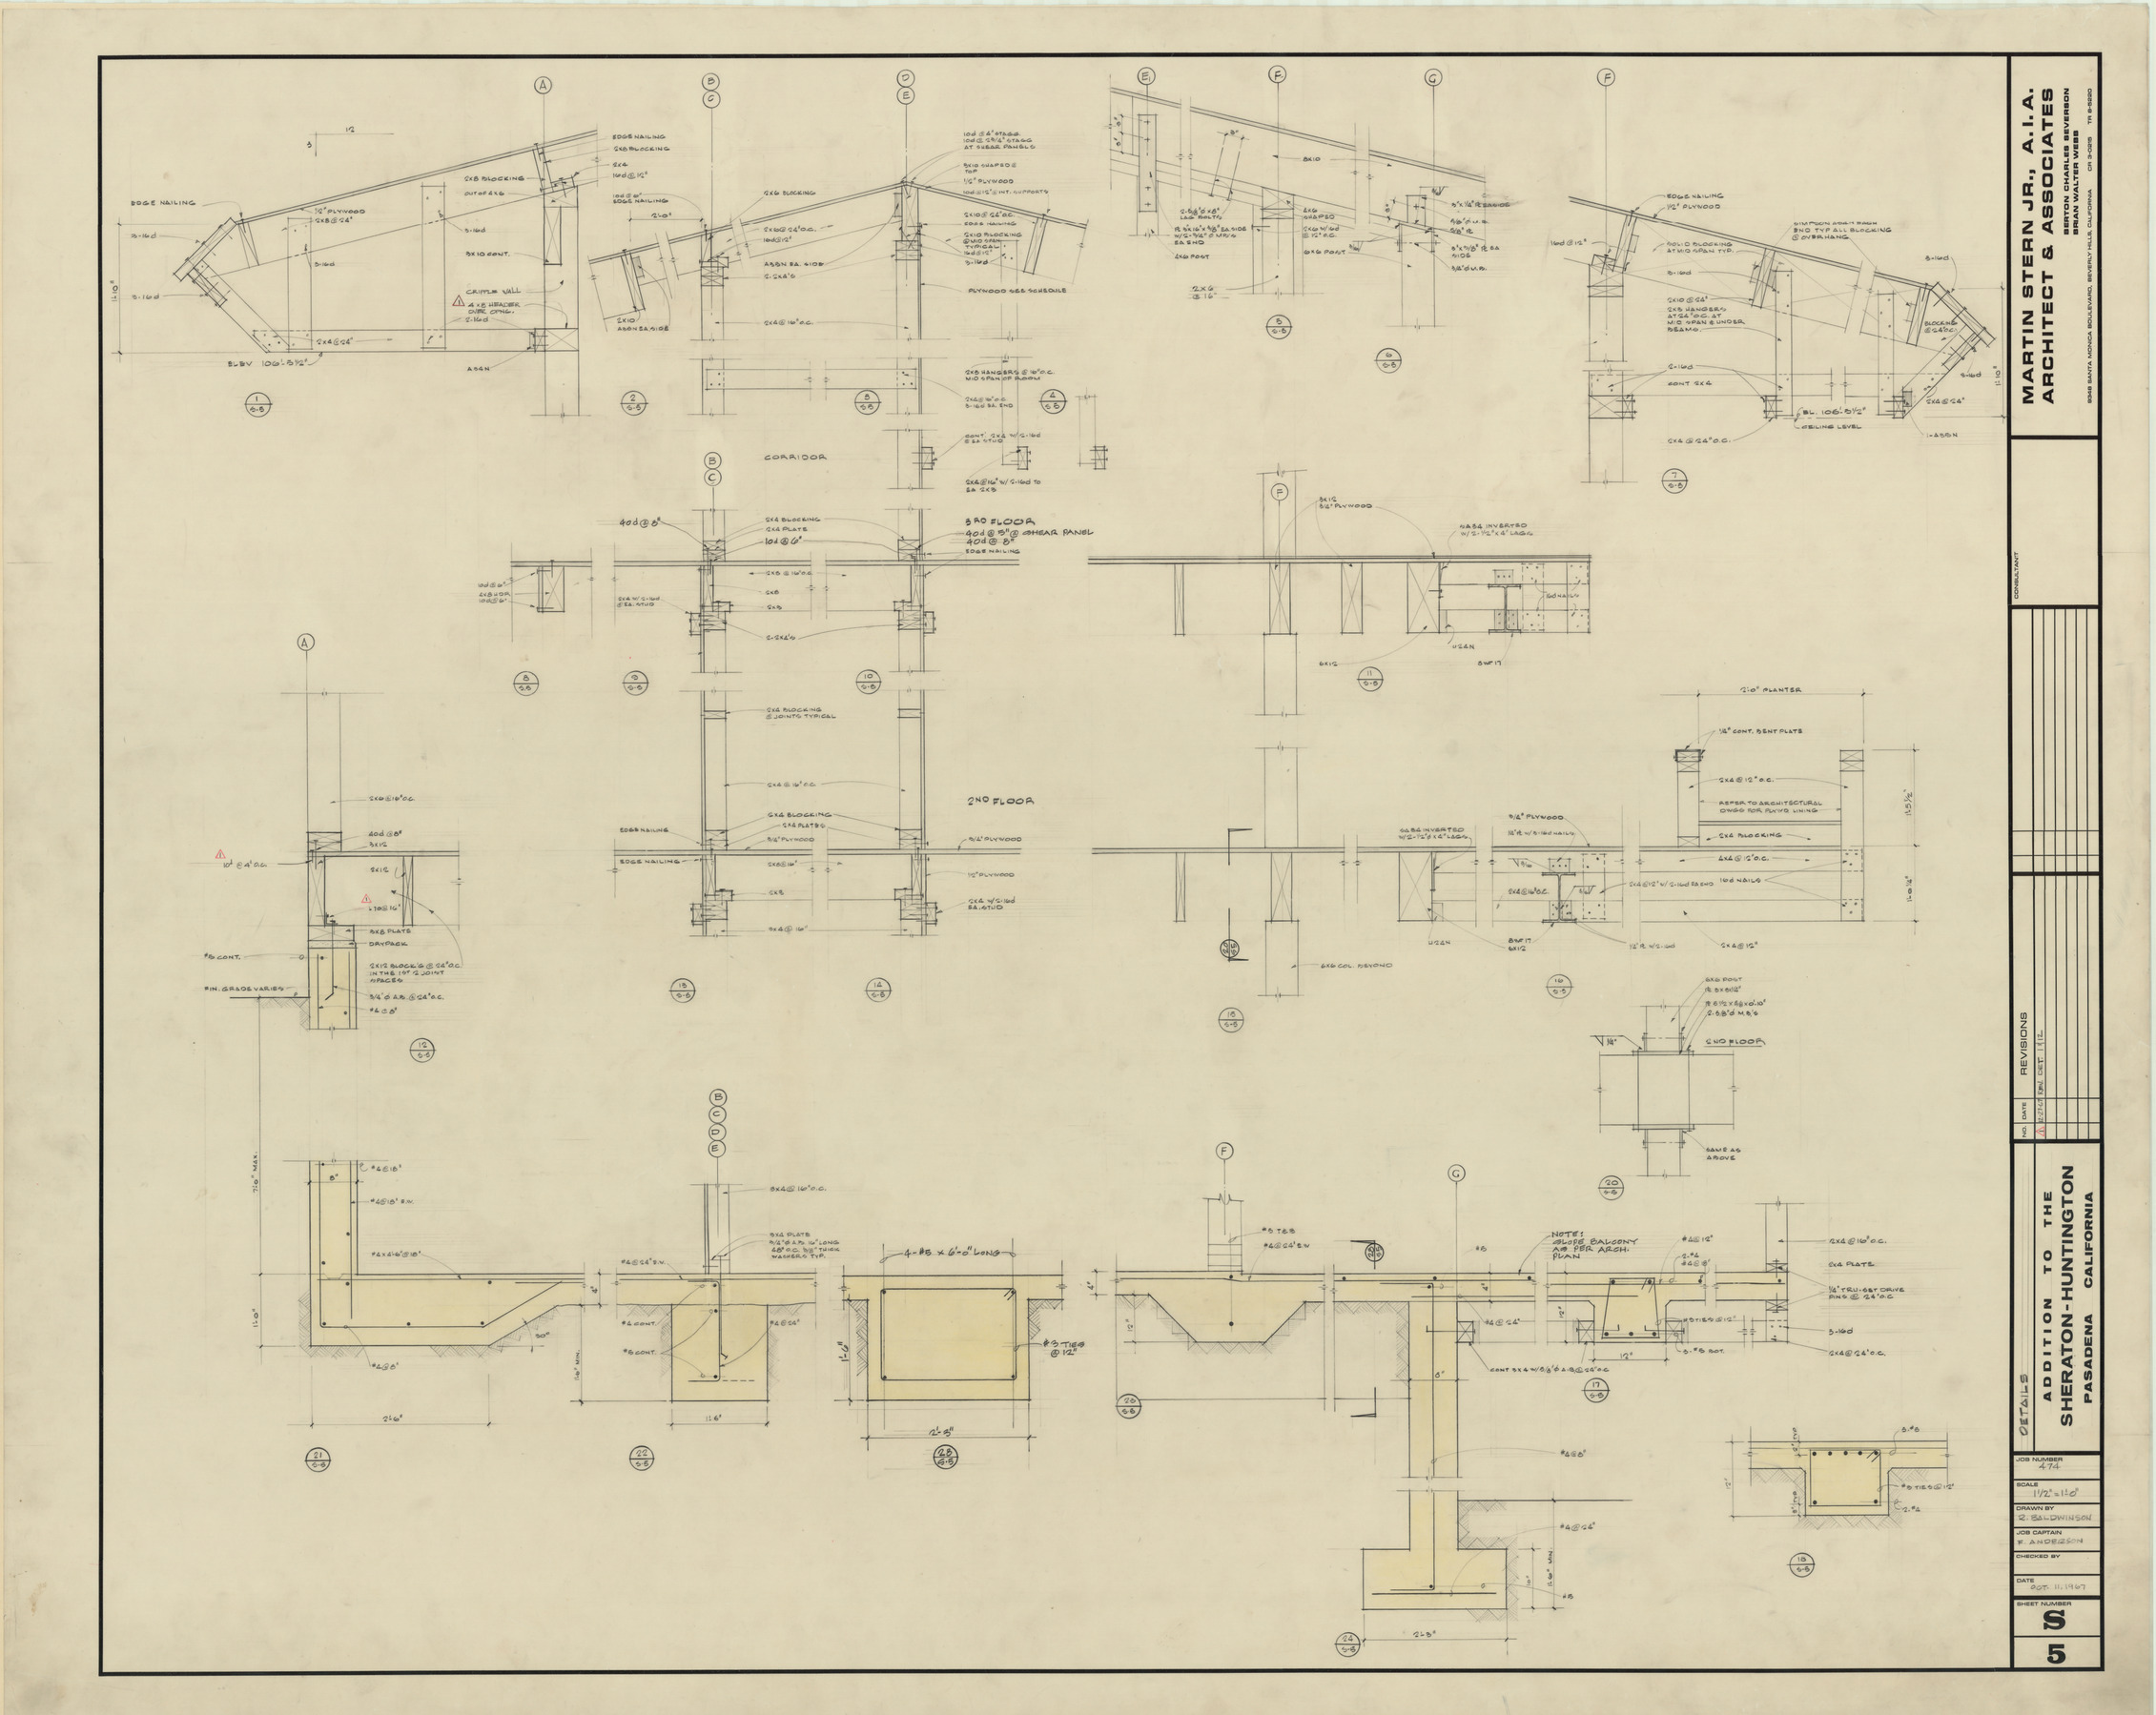 Huntington addition, architectural, electrical, mechanical, and plumbing: architectural drawings, image 019